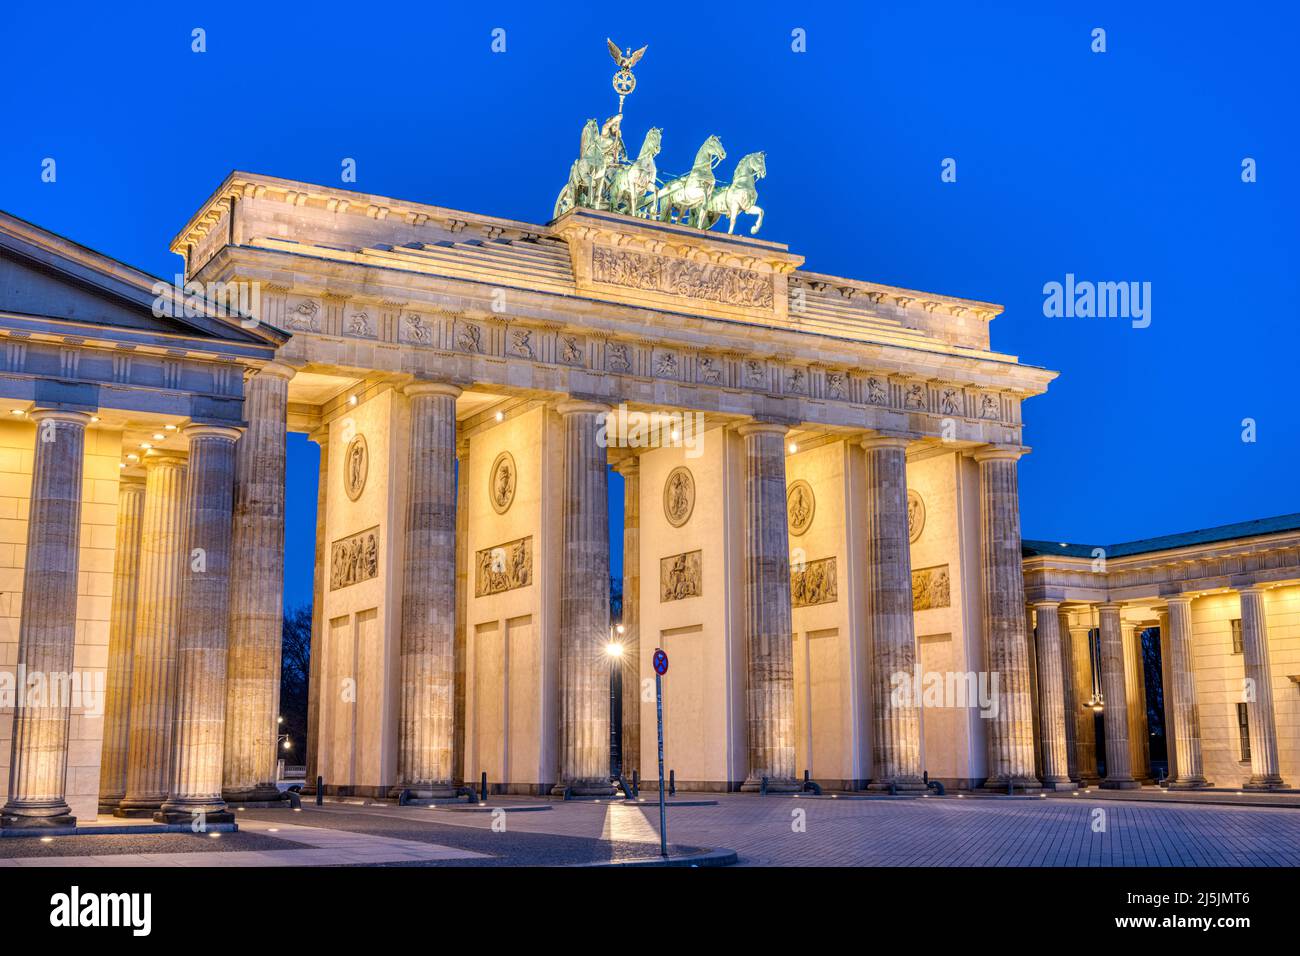 The famous illuminated Brandenburg Gate in Berlin during blue hour Stock Photo